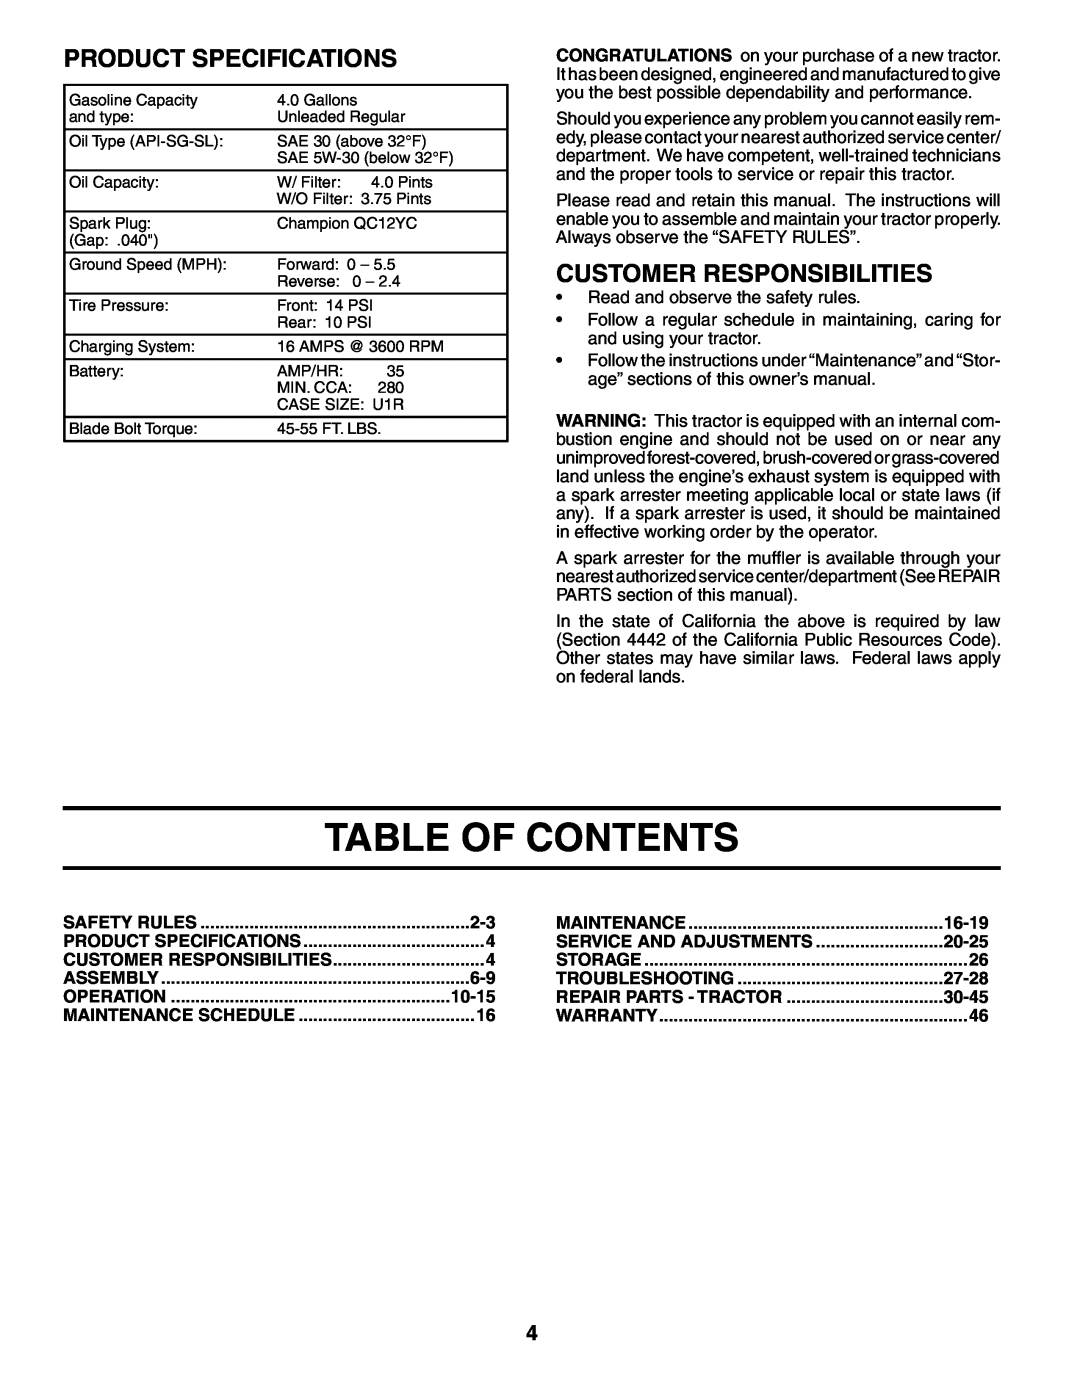 Poulan PD25PH48STE owner manual Table Of Contents, Product Specifications, Customer Responsibilities 